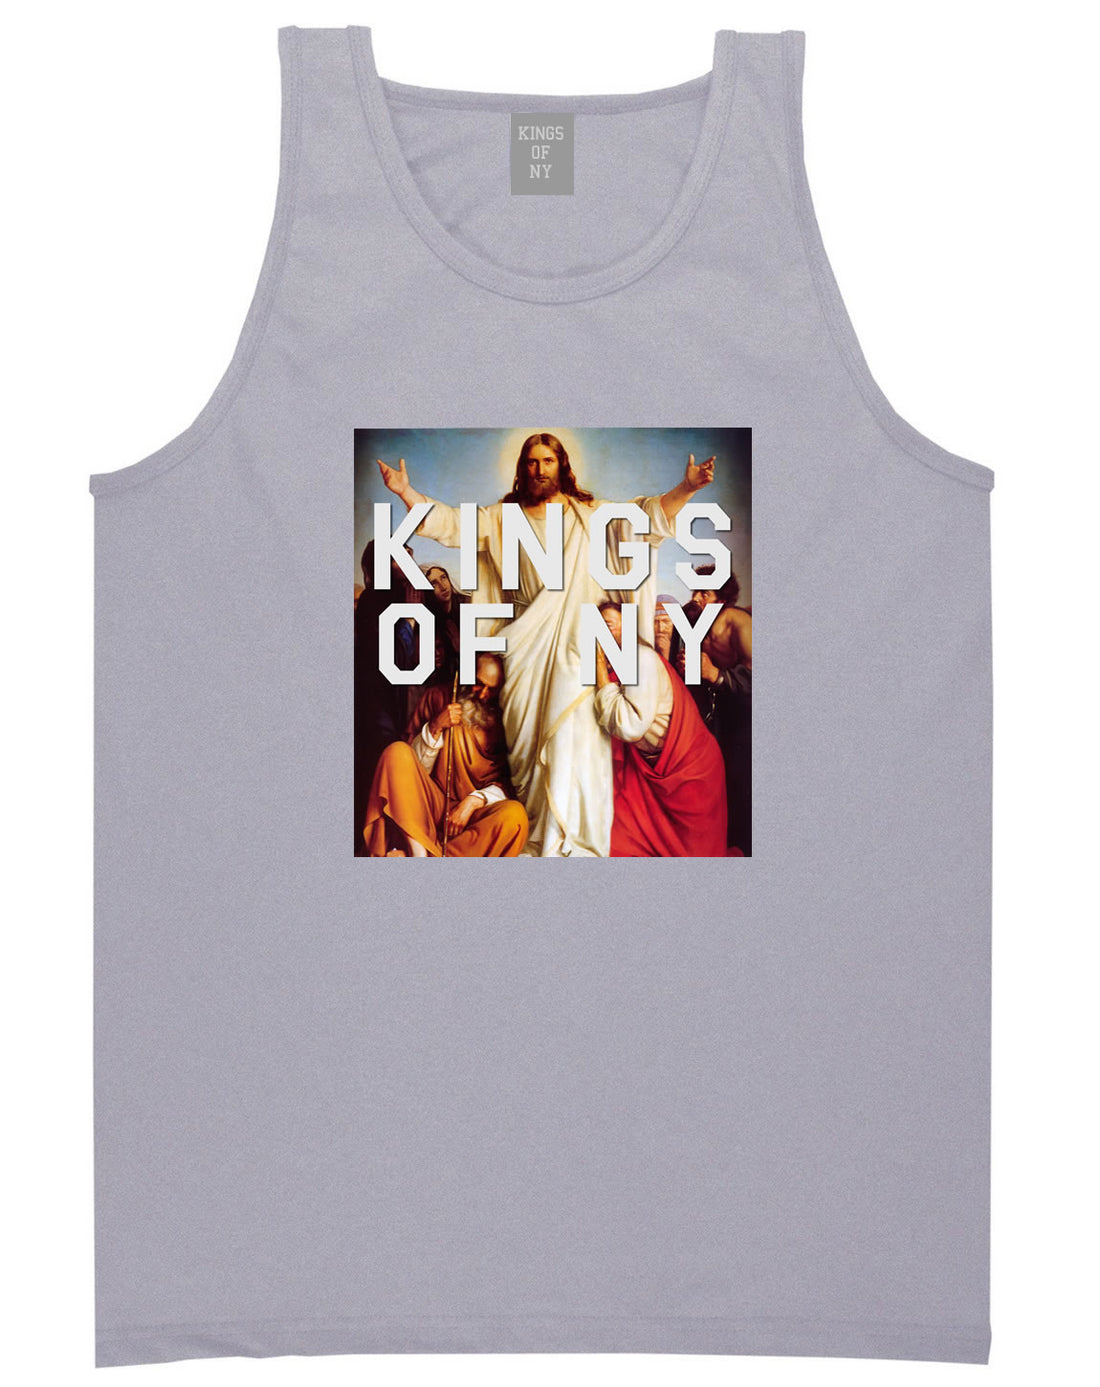 Jesus Worship and Praise of Power Tank Top in Grey By Kings Of NY